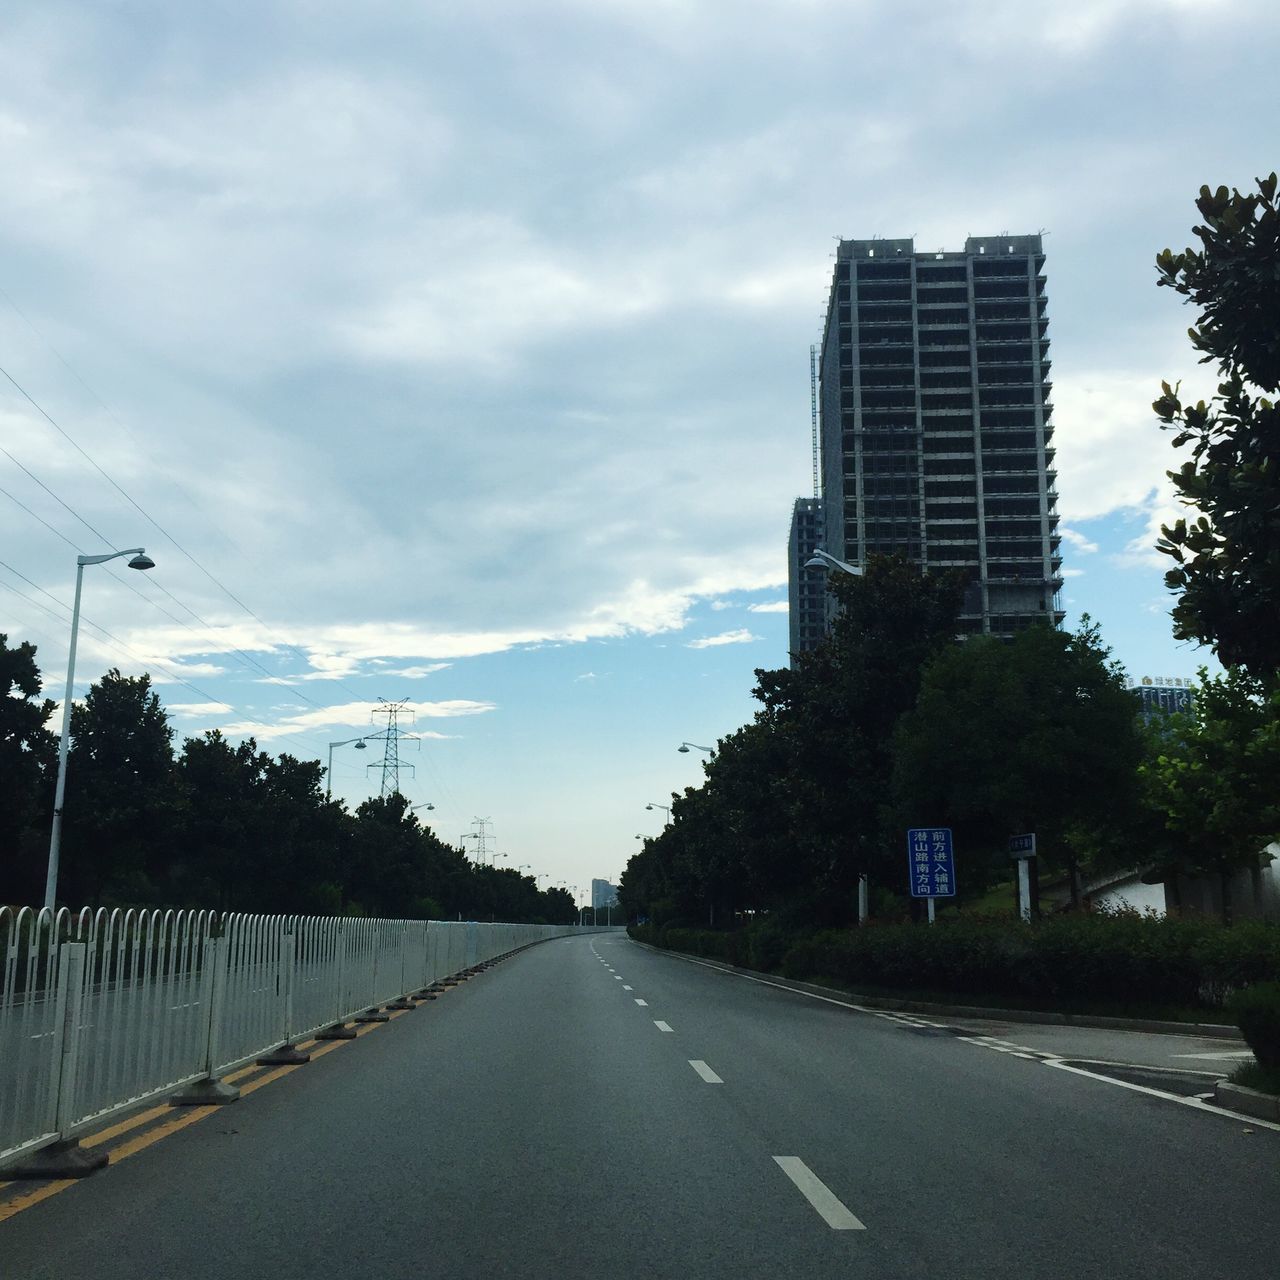 the way forward, diminishing perspective, road, sky, architecture, vanishing point, built structure, road marking, empty road, cloud - sky, tree, empty, long, cloudy, city, cloud, outdoors, no people, day, tall - high, overcast, nature